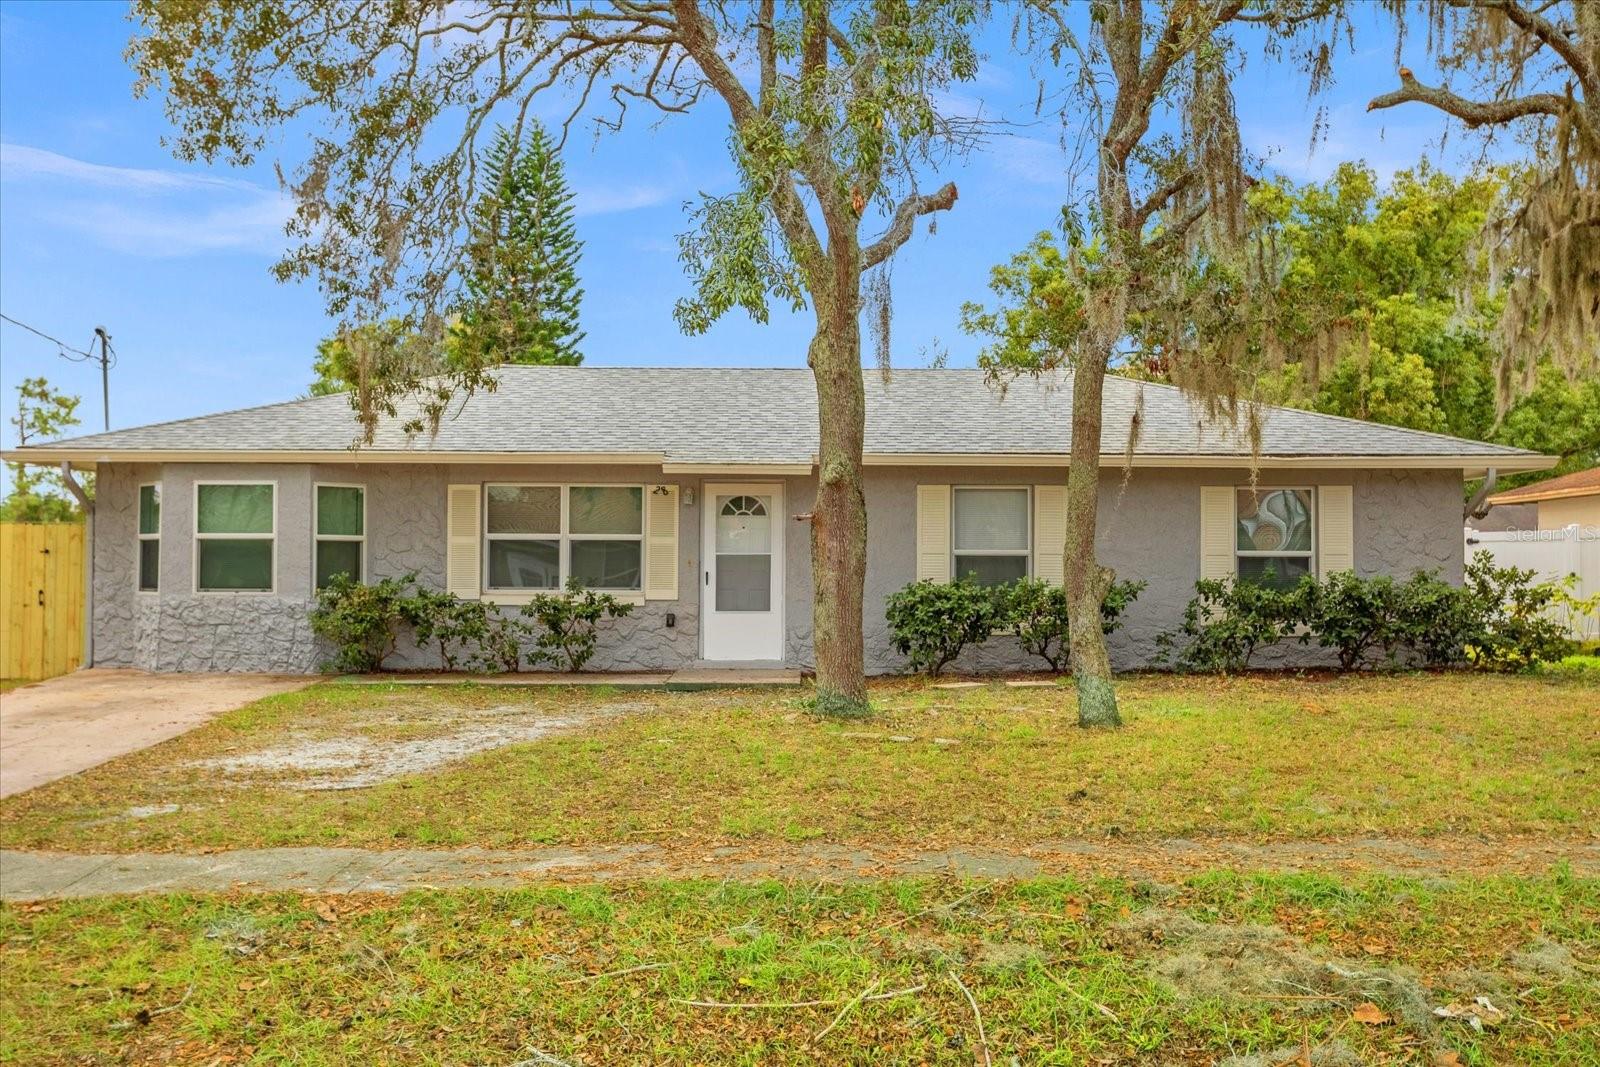 Apopka Terrace First Add Real Estate Listings Main Image